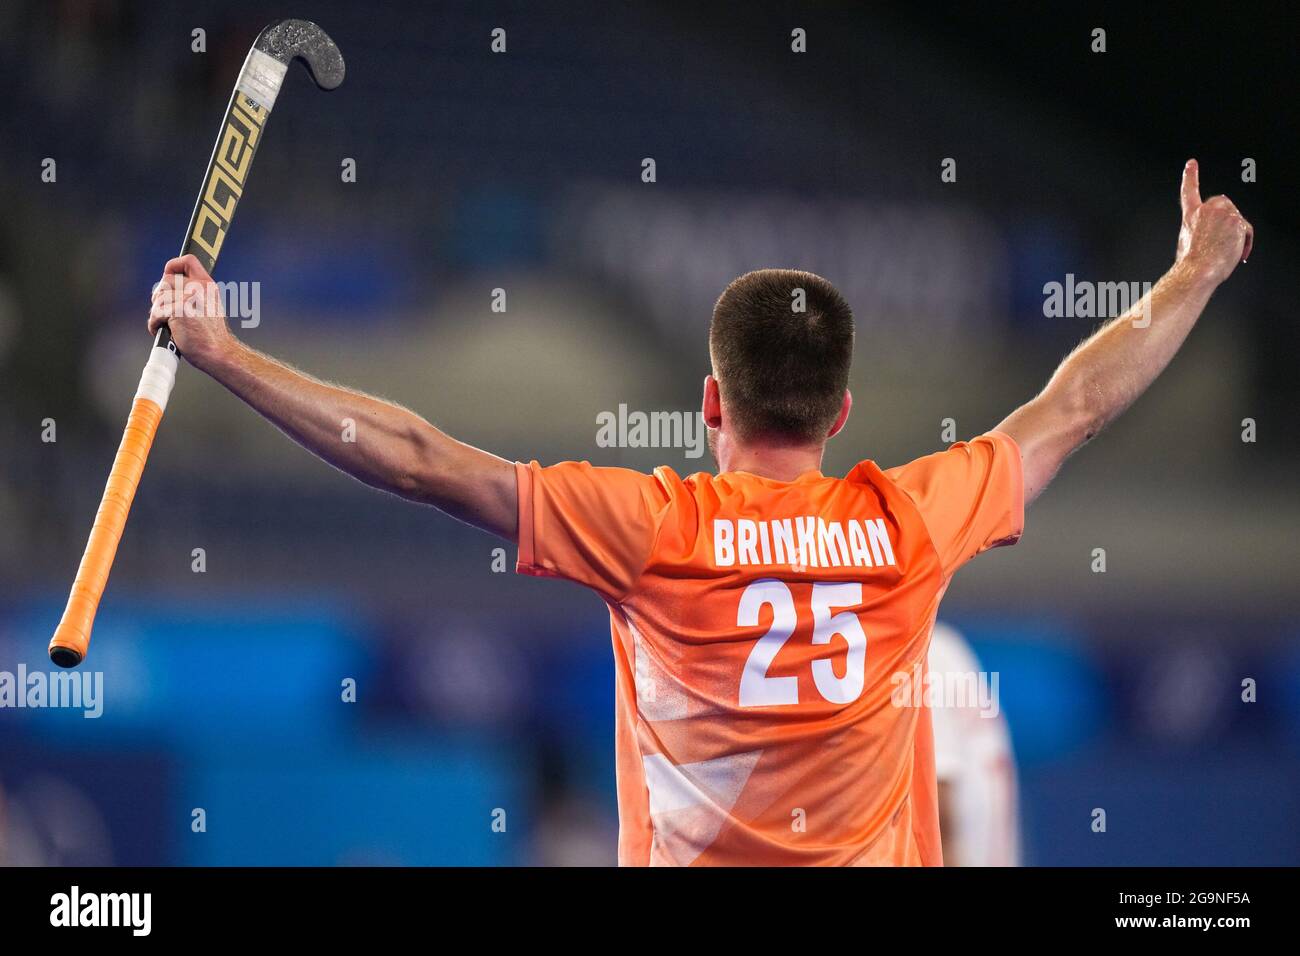 TOKYO, JAPAN - JULY 27: Thierry Brinkman of the Netherlands celebrates after scoring his sides second goal competing on Men's Pool B during the Tokyo 2020 Olympic Games at the Oi Hockey Stadium on July 27, 2021 in Tokyo, Japan (Photo by Yannick Verhoeven/Orange Pictures) NOCNSF Stock Photo